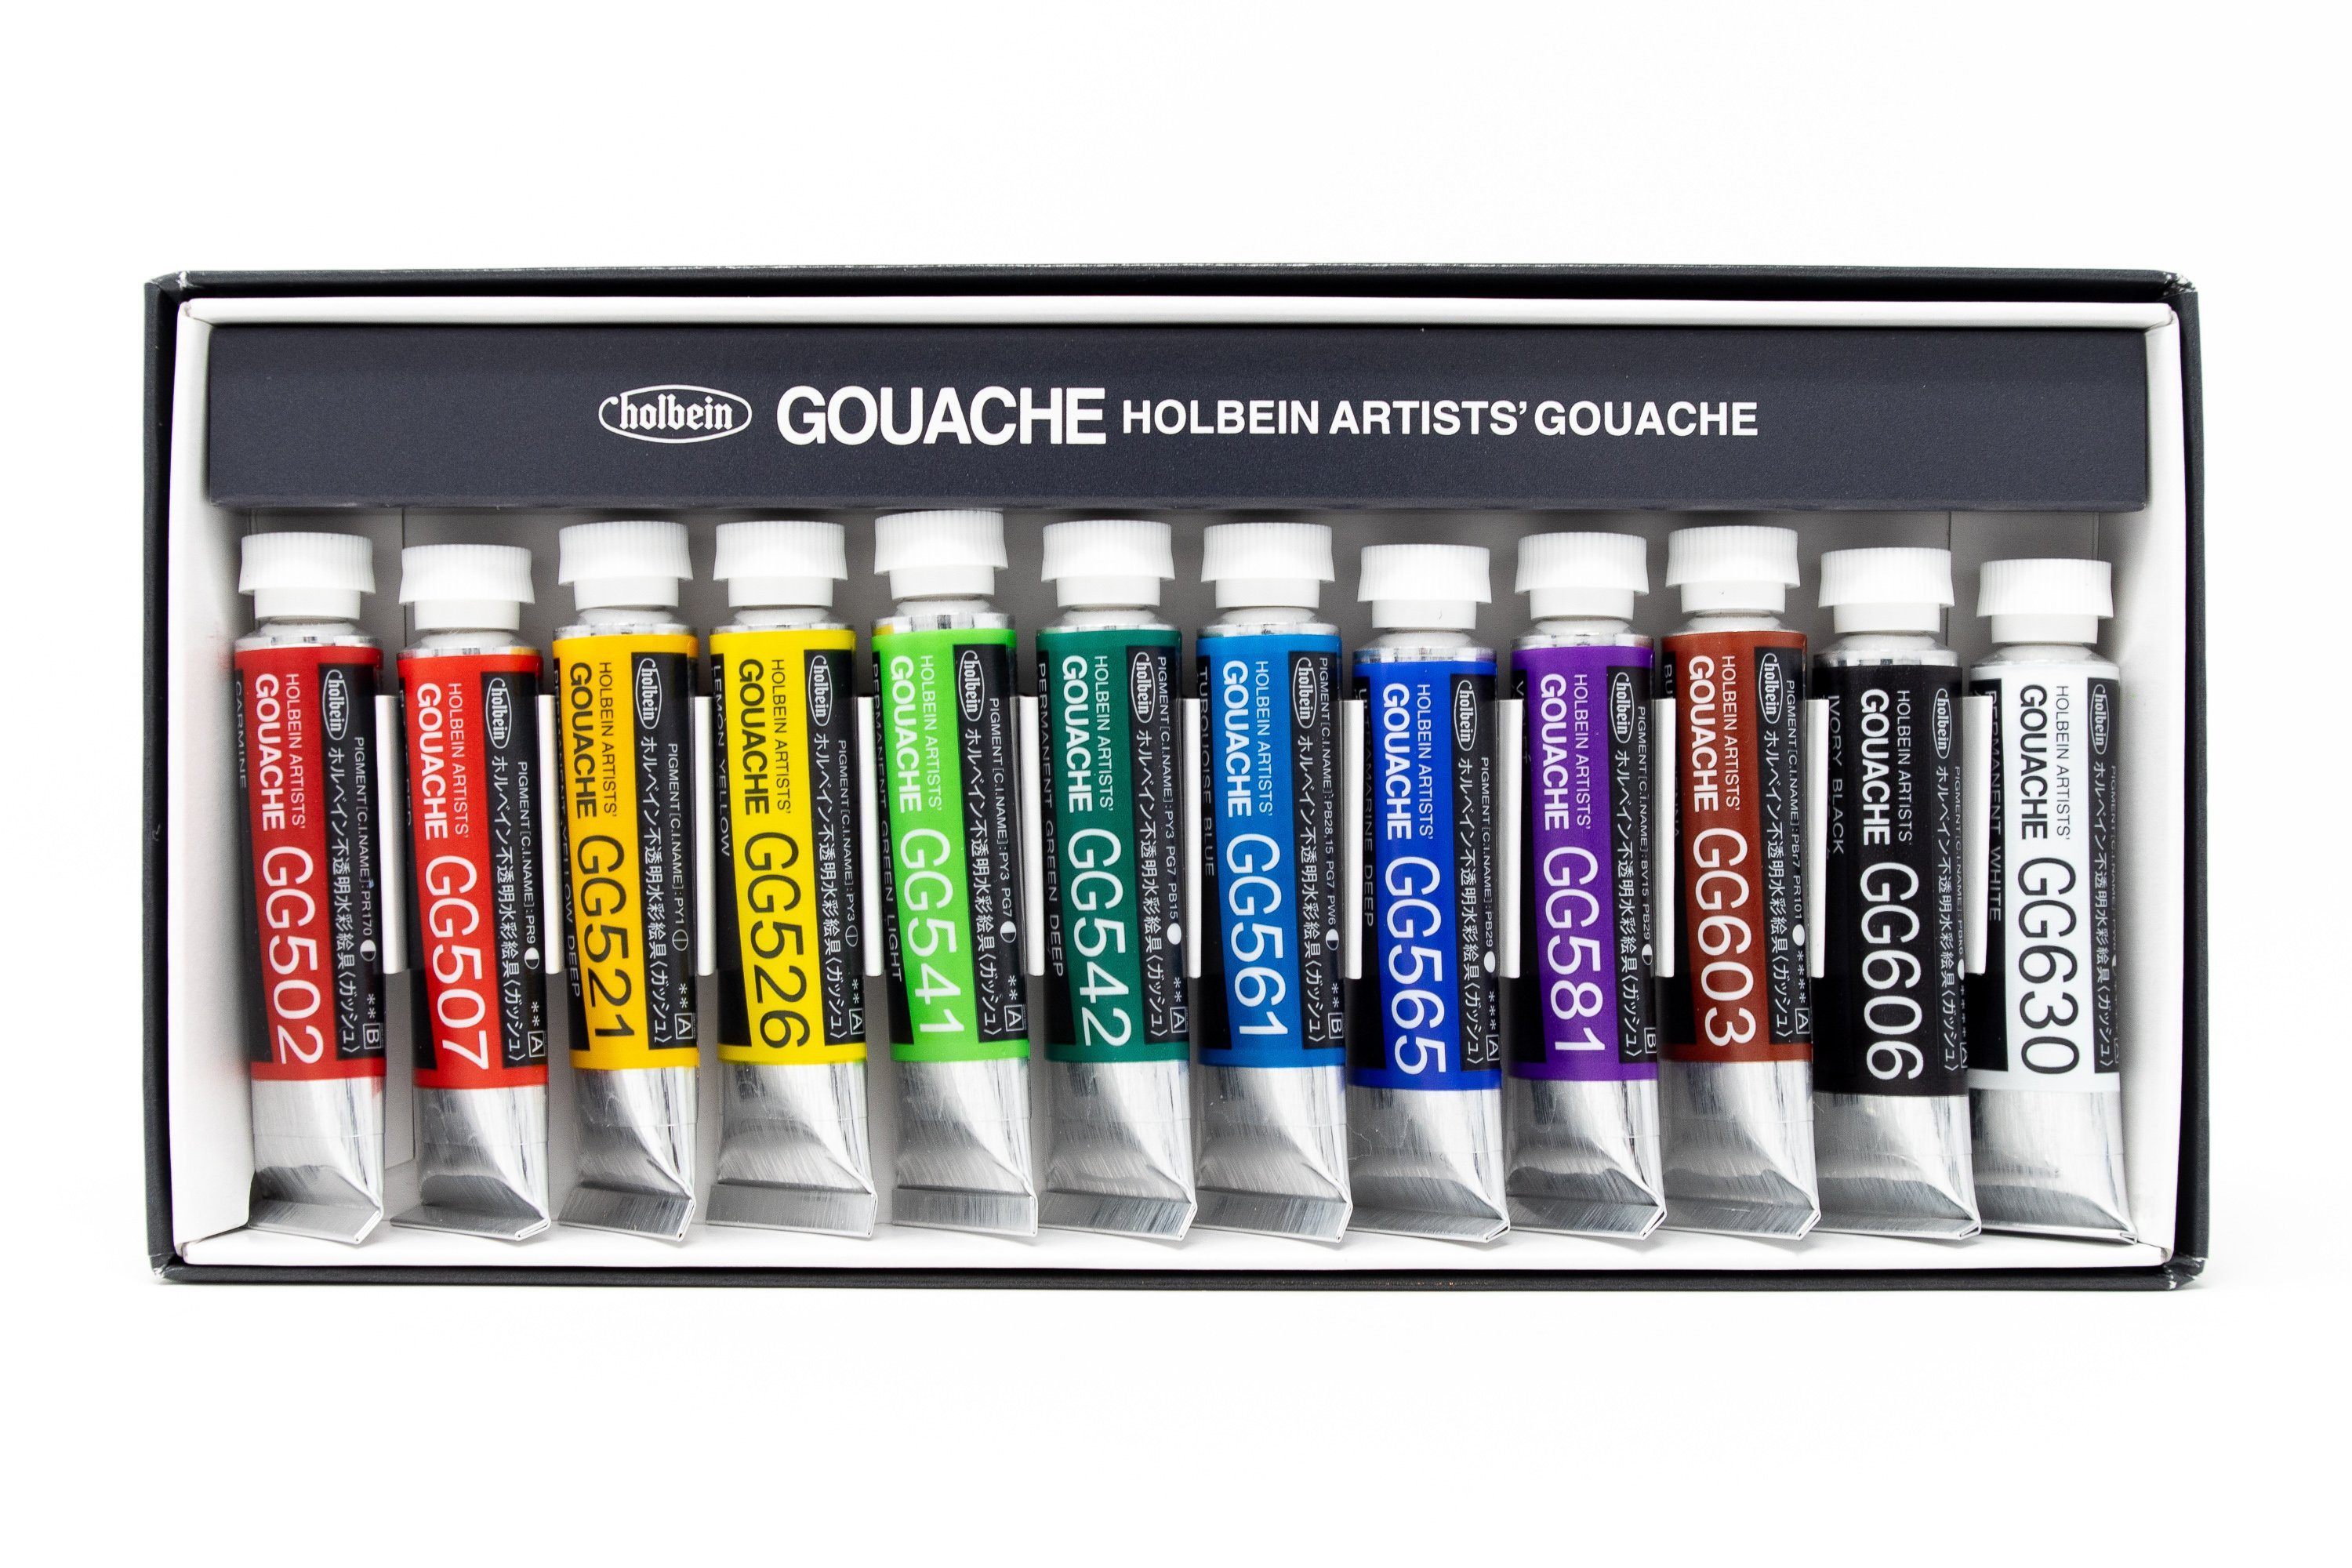 Holbein Designer Artists Gouache 15ml Primary Color Set of 5 